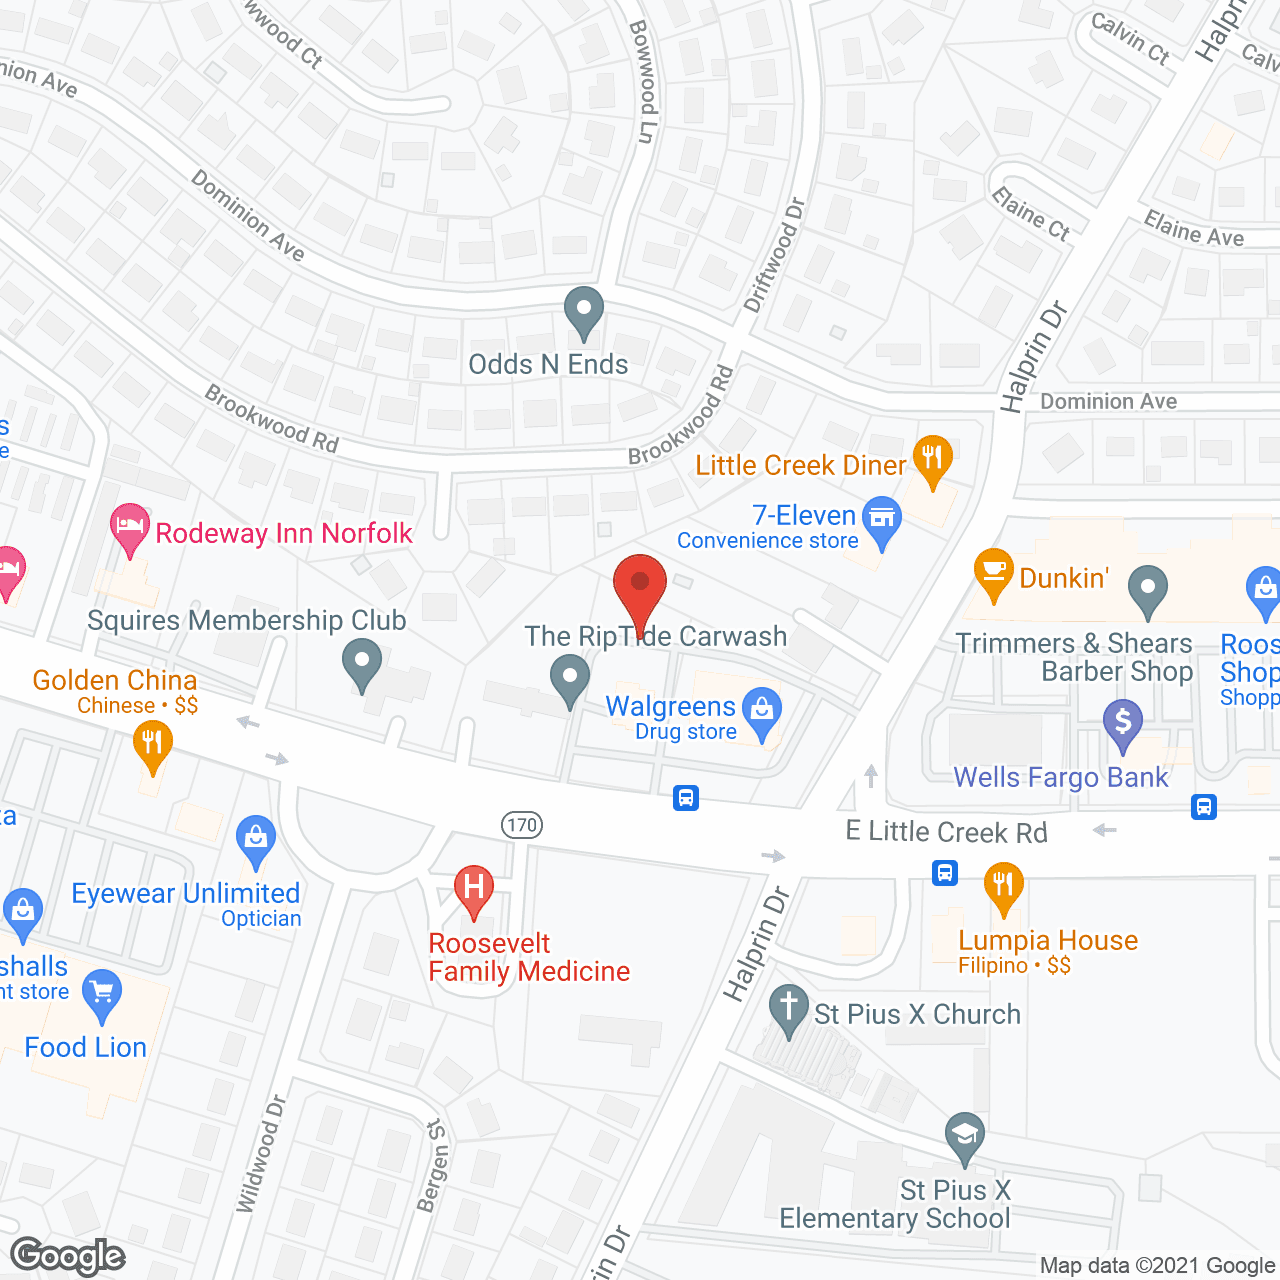 Quality Kare Health Care Services in google map